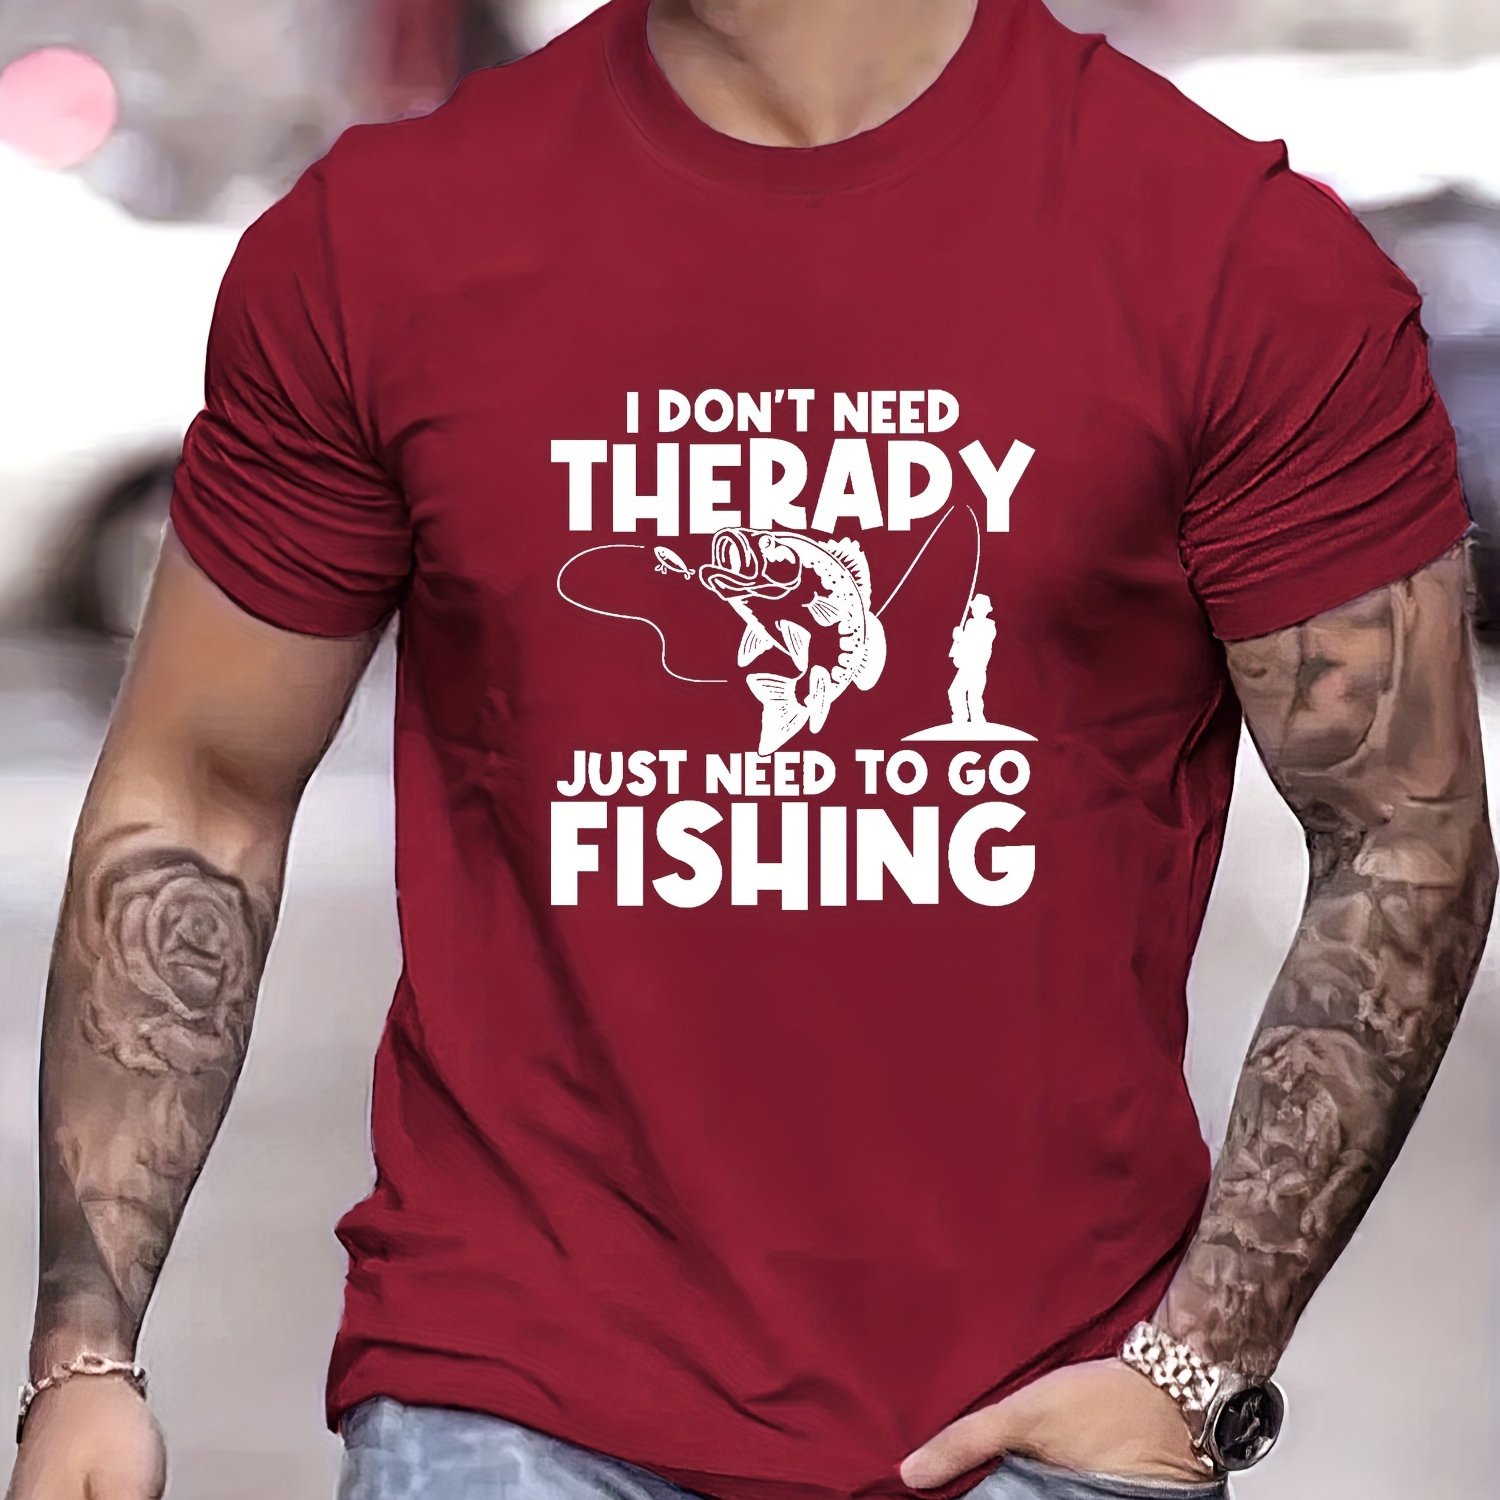 I Just Need To Go Fishing - T-shirt